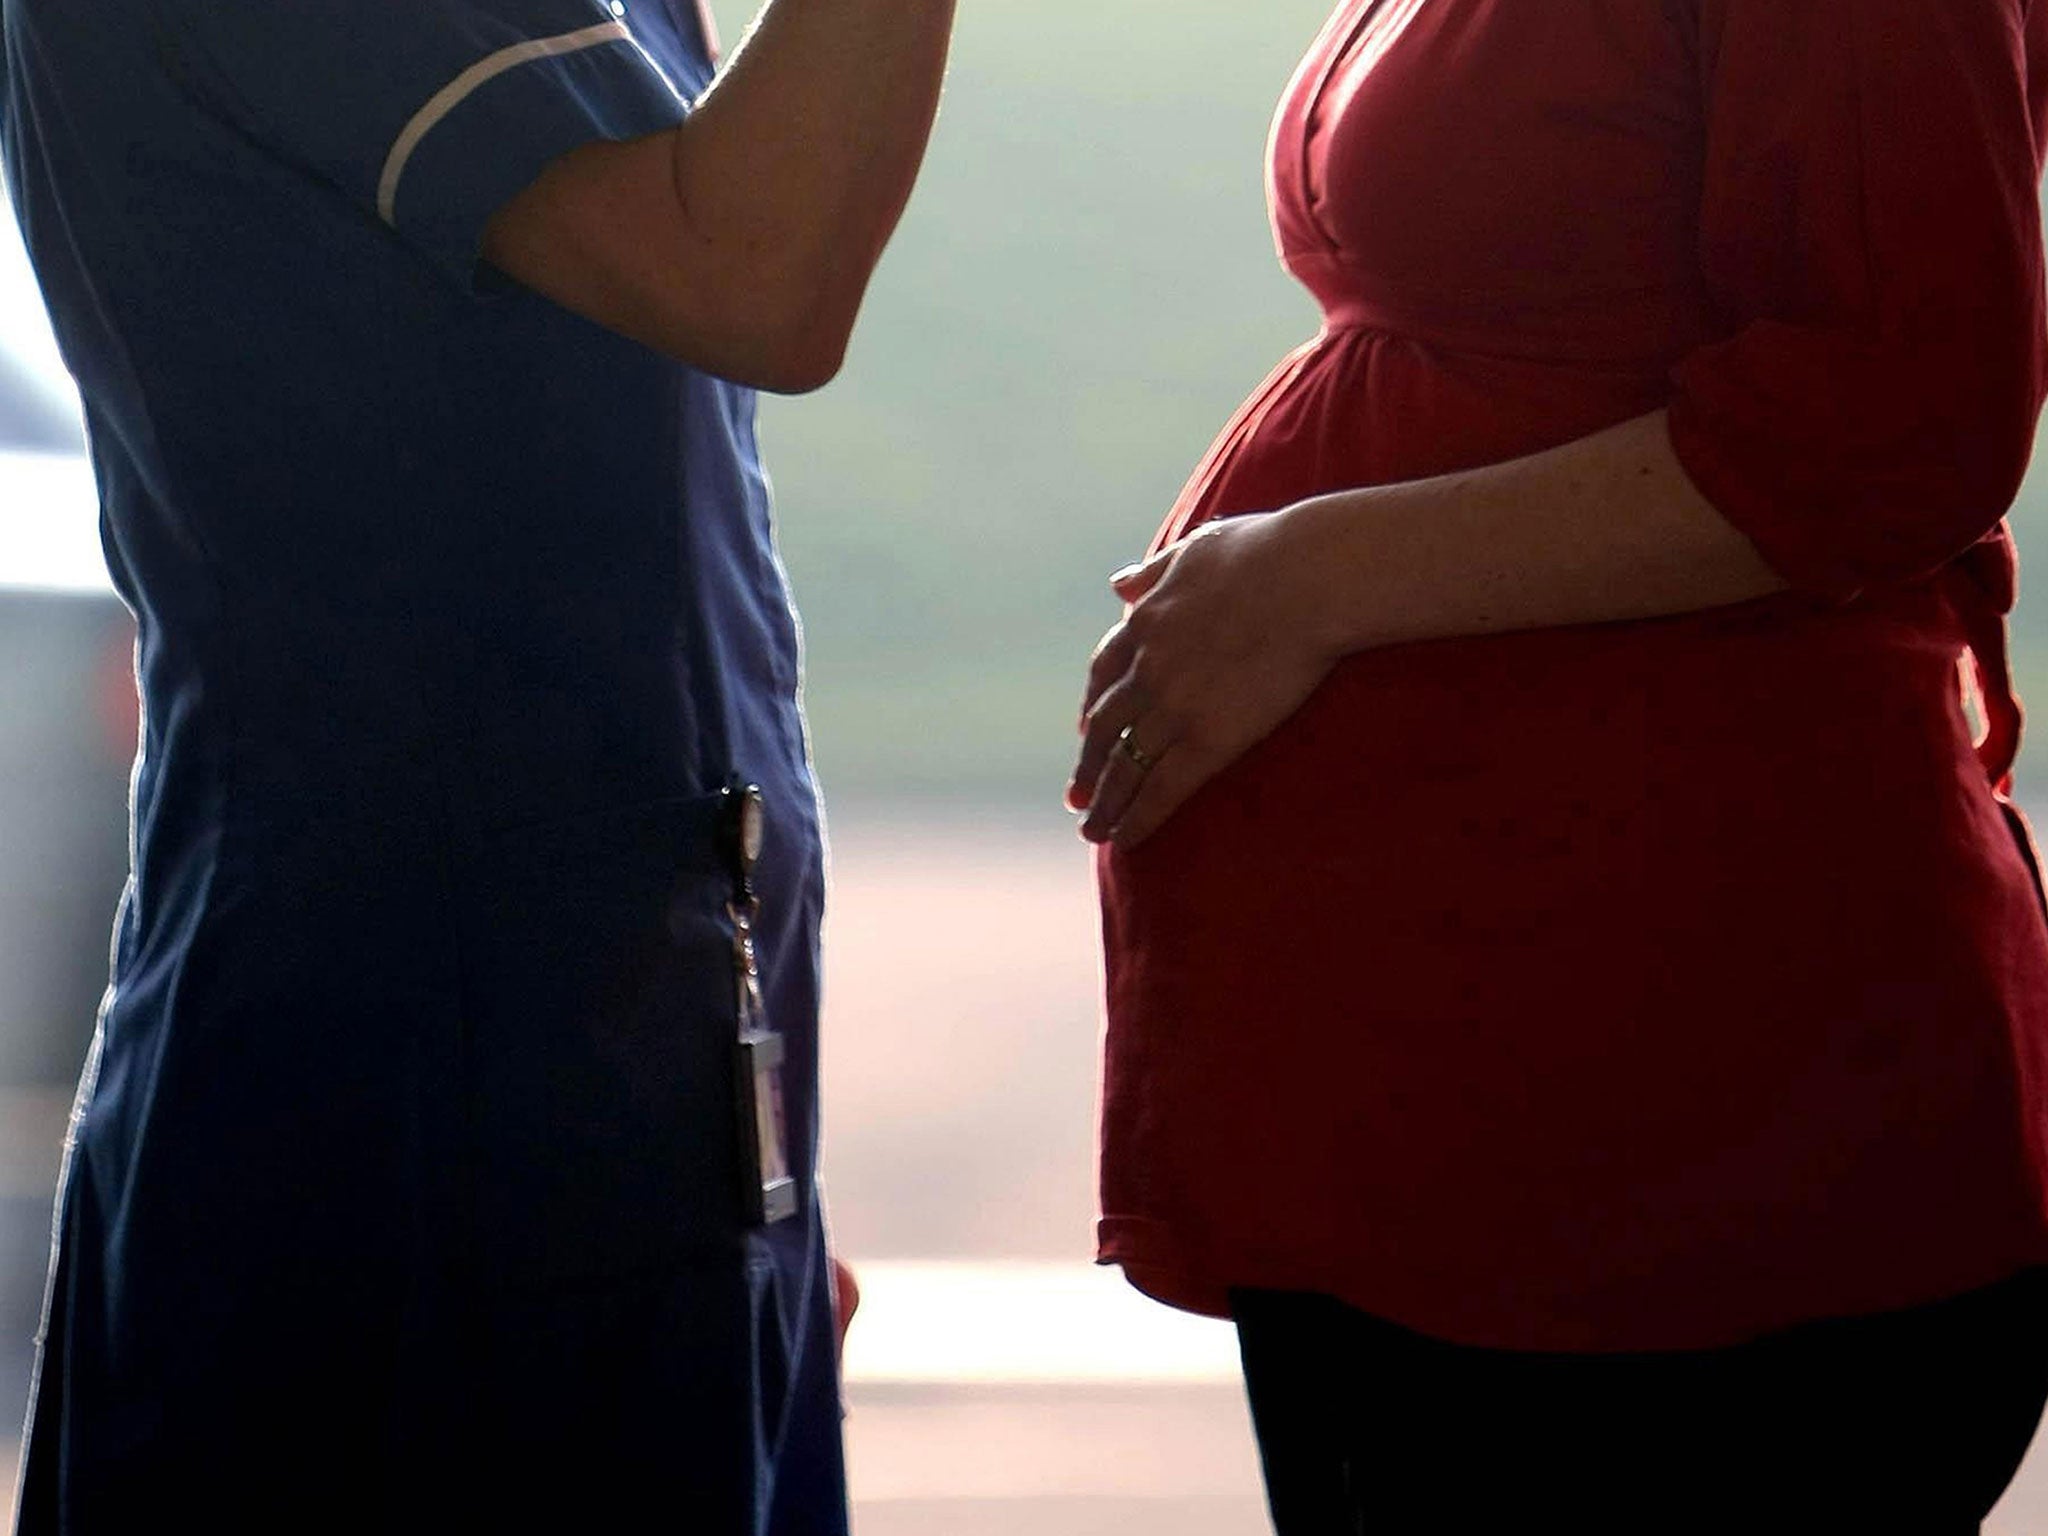 The research has been conducted by the Royal College of Midwives who are calling for a greater focus on staff health and wellbeing